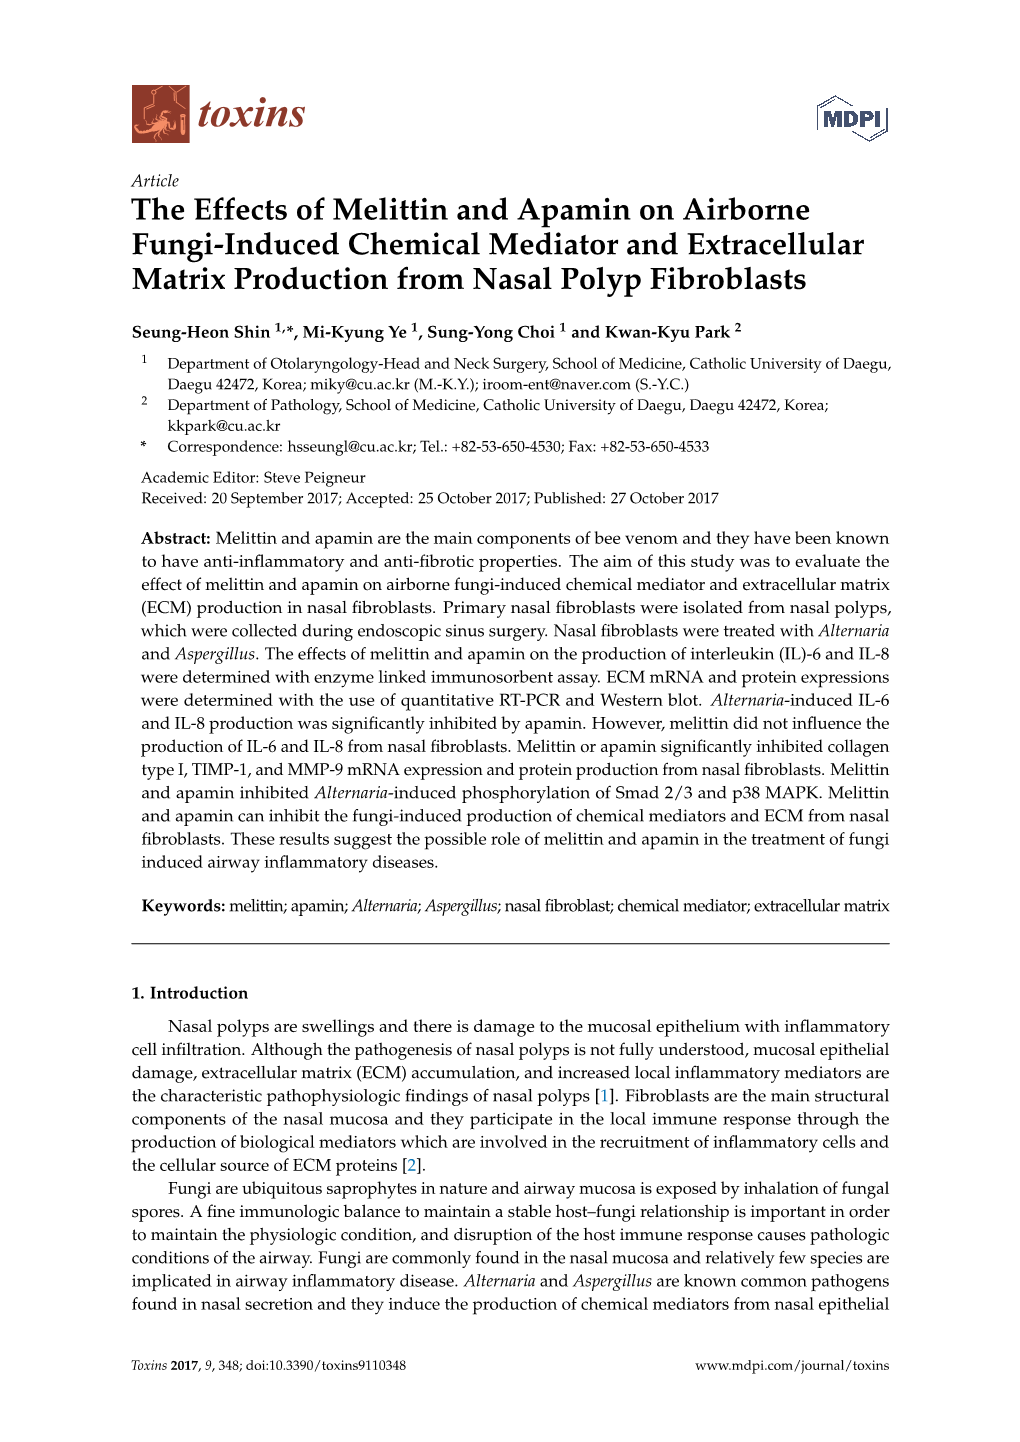 The Effects of Melittin and Apamin on Airborne Fungi-Induced Chemical Mediator and Extracellular Matrix Production from Nasal Polyp Fibroblasts